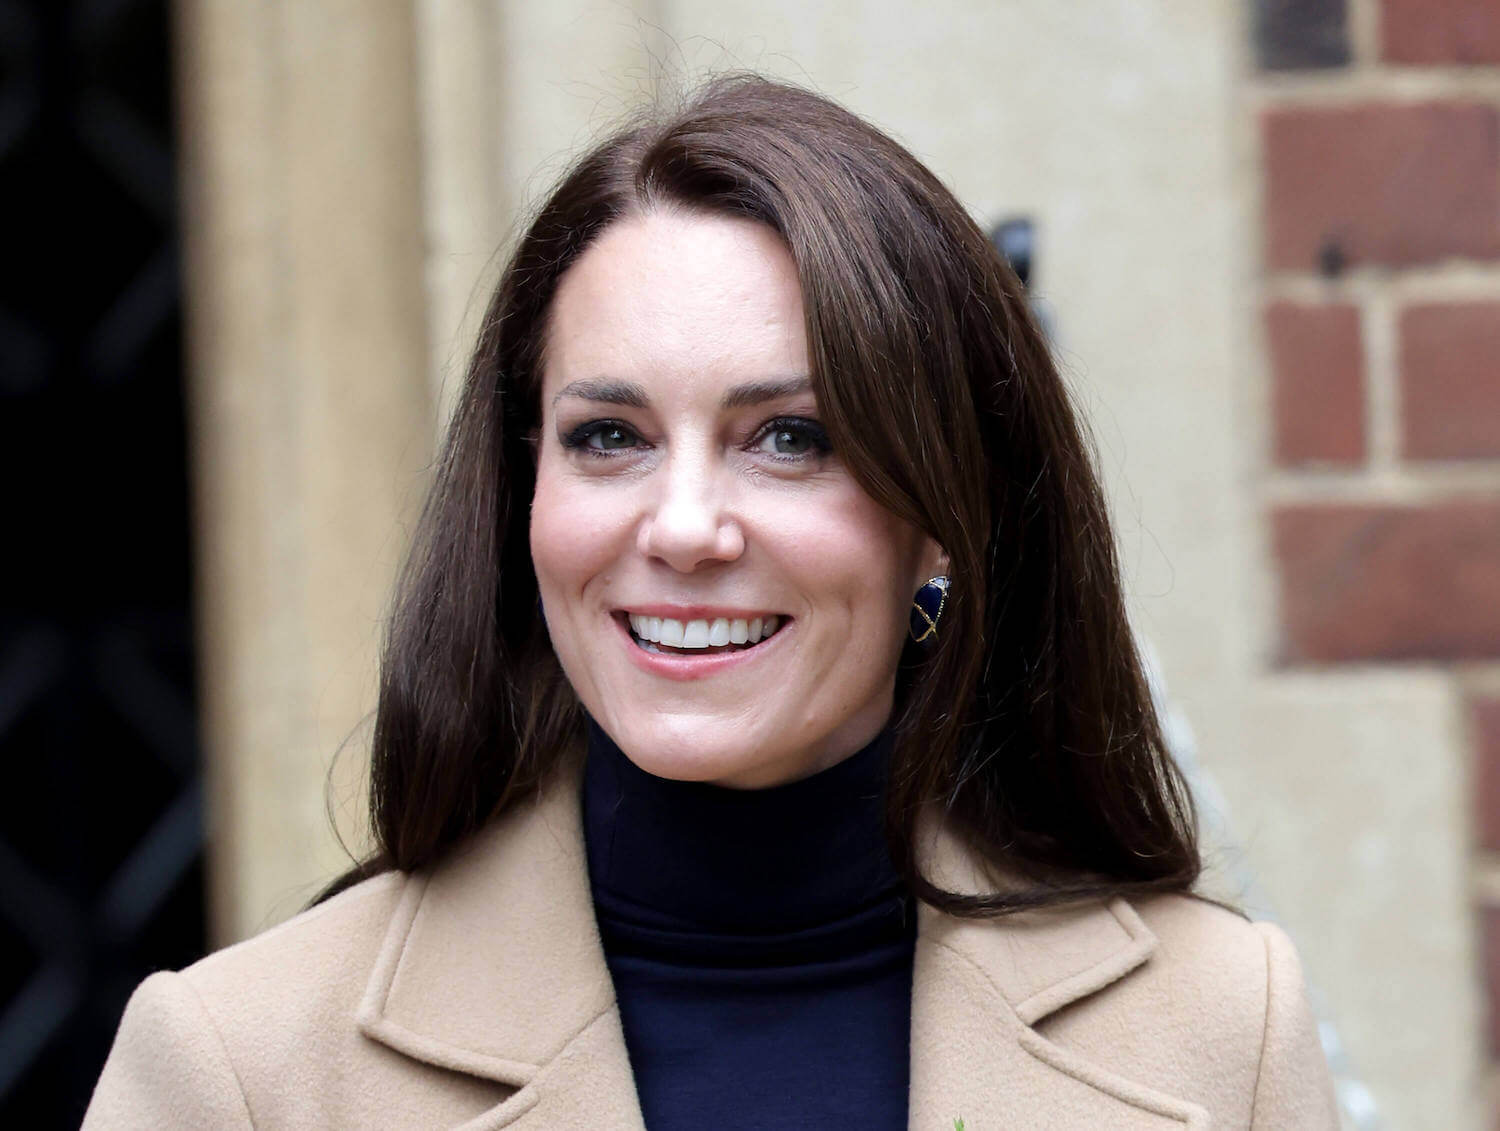 Kate Middleton wears natural makeup as she smiles wearing a black turtleneck and camel colored coat